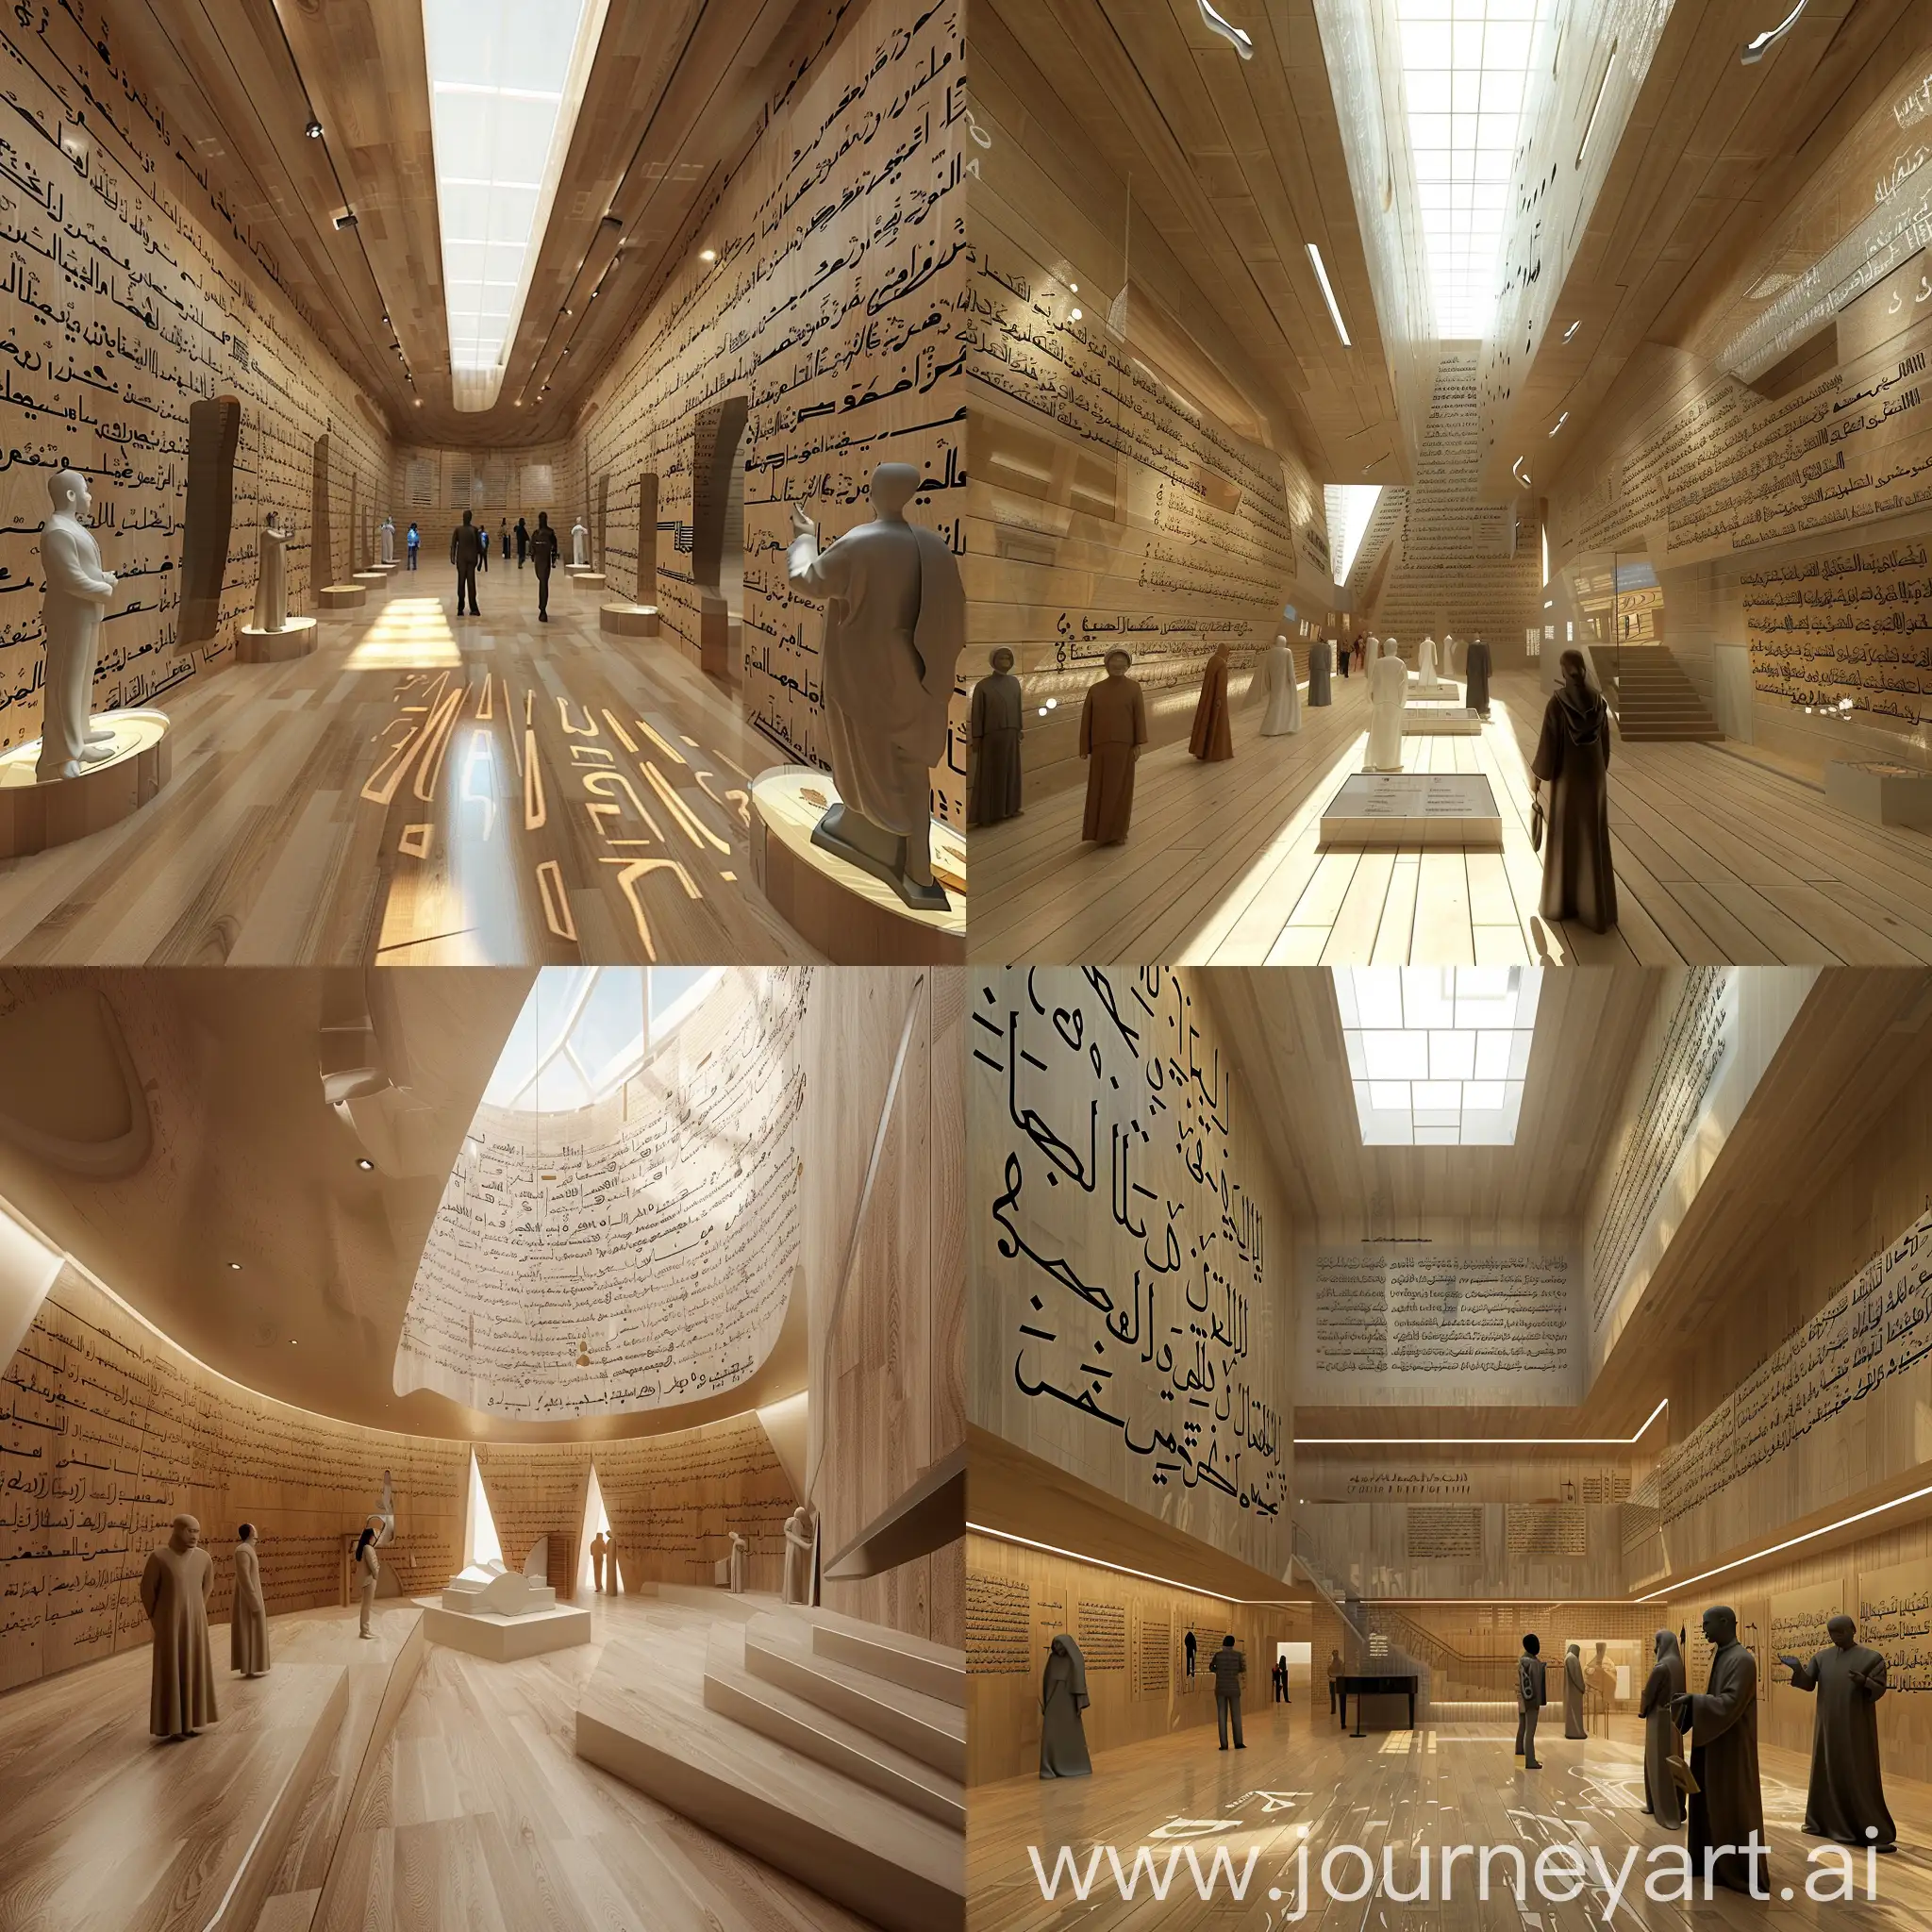 Classical-Arab-Music-Museum-with-Musical-NoteInspired-Architecture